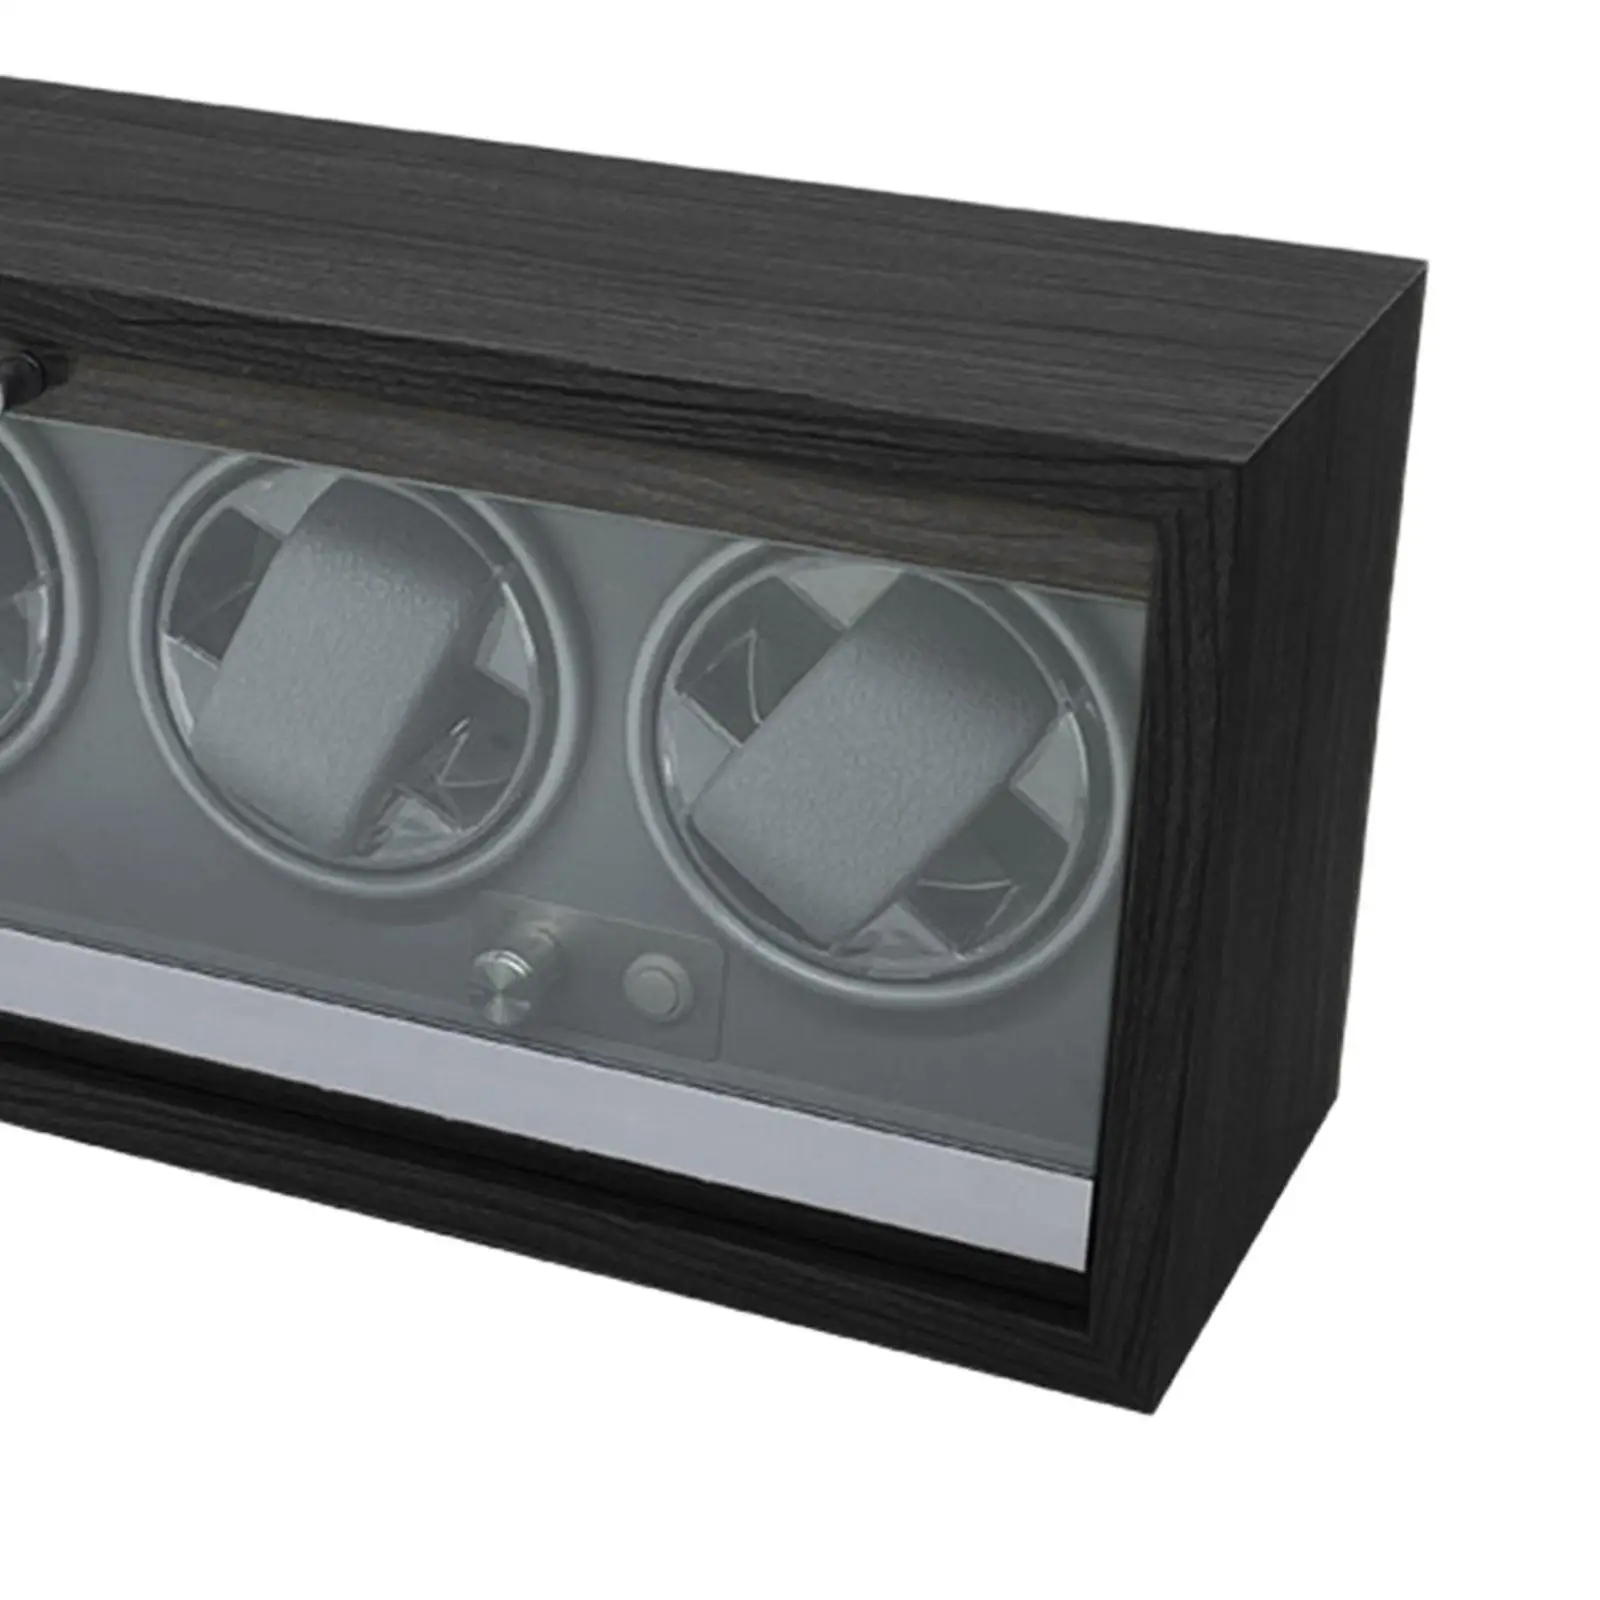 Watch Winder Box Automatic 4 Slots Mechanical Rotating Box Electric Watch Winder Winding Watches Shaker for Mechanical Watches